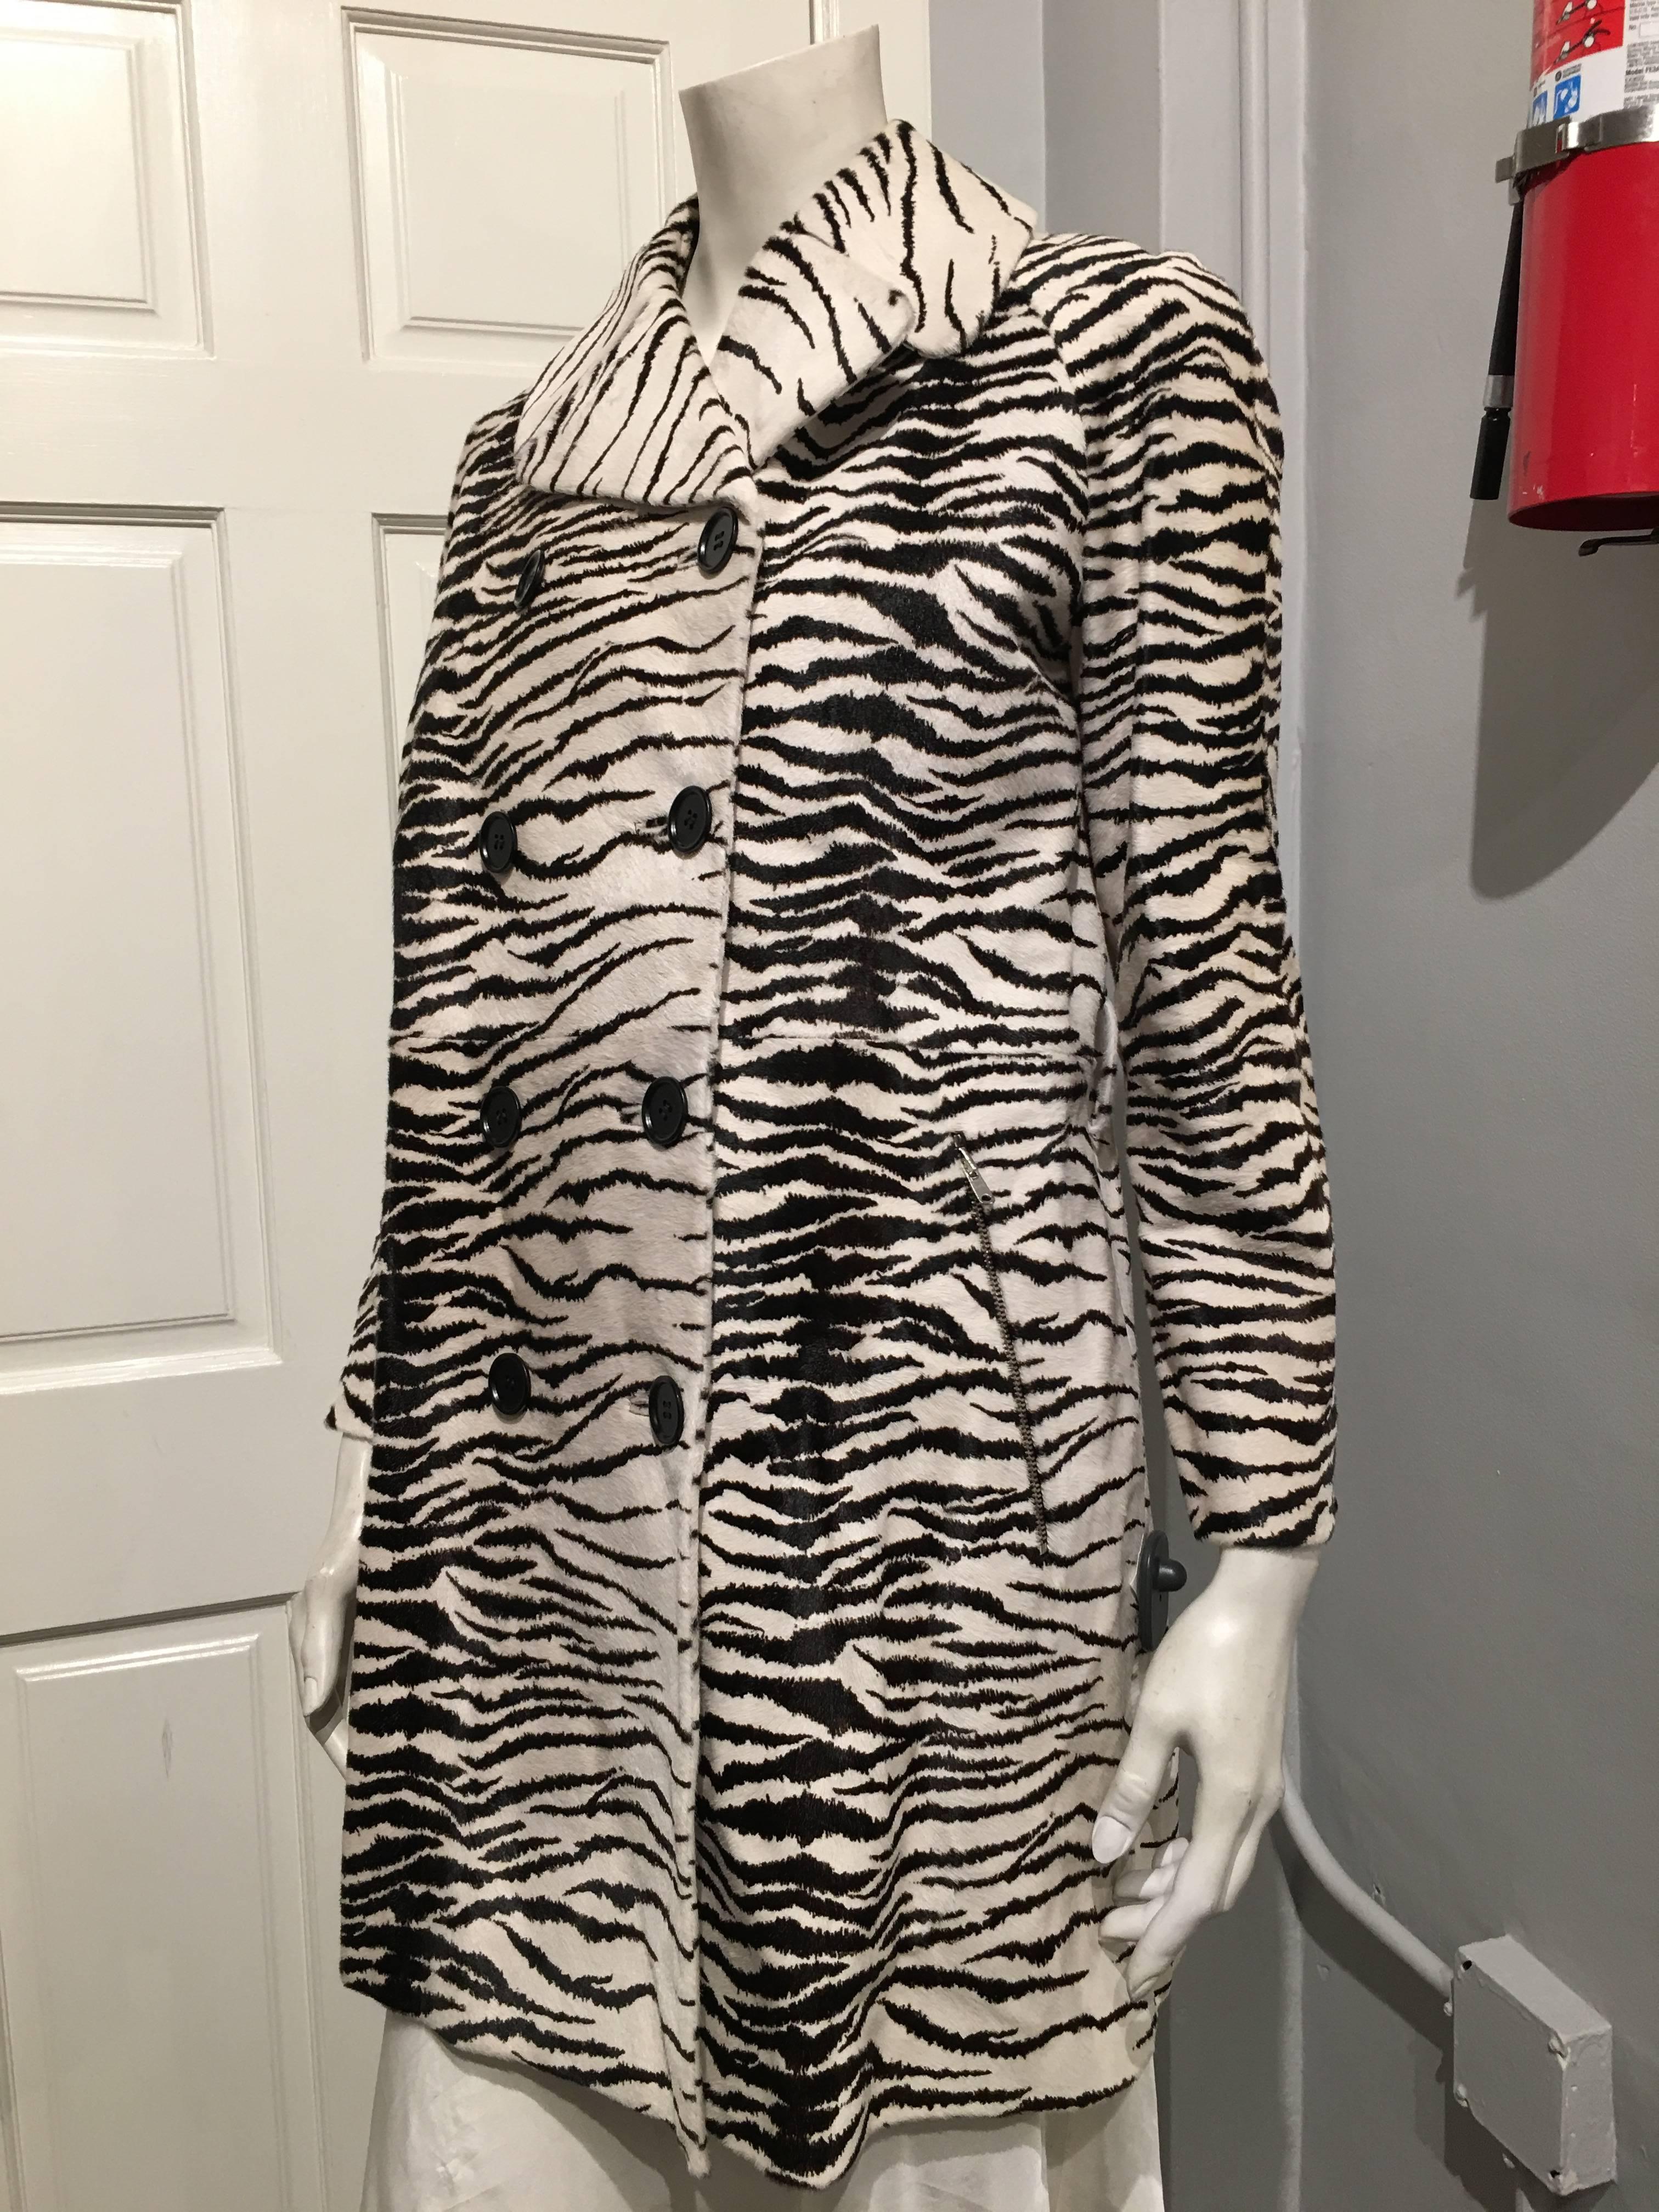 Flared, double breasted Alaia hair calf coat in a black and white zebra  pattern. The lining is black in a light water proof polyester material.

The coat is sold as is as the belt is missing.